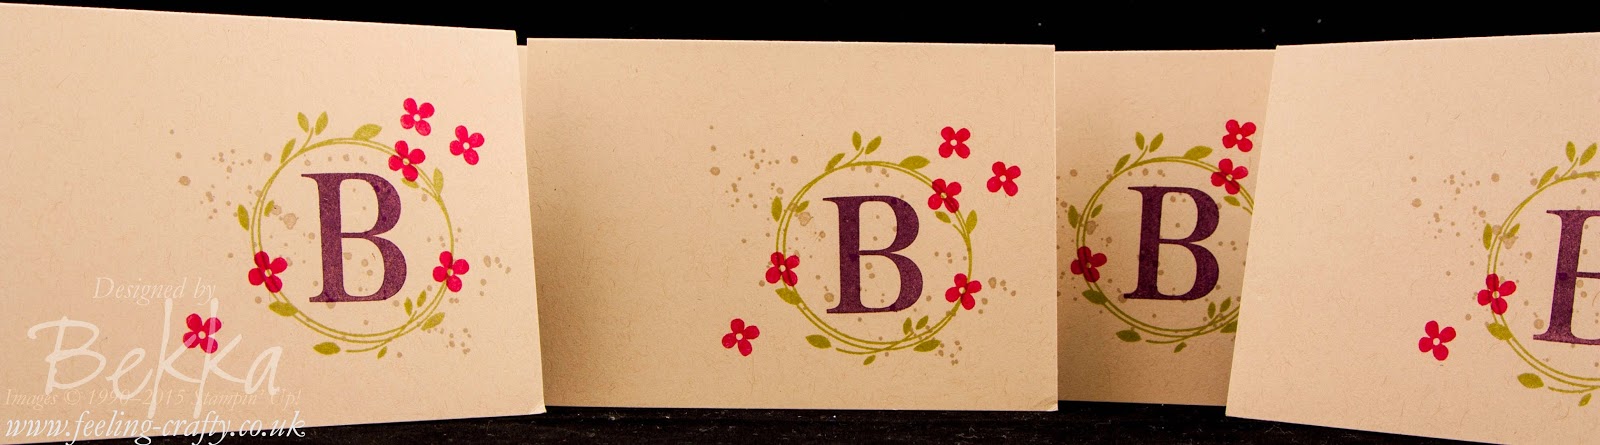 Make Your Own Monogram Note Cards Using Stampin' Up! UK Stamps.  Get them here